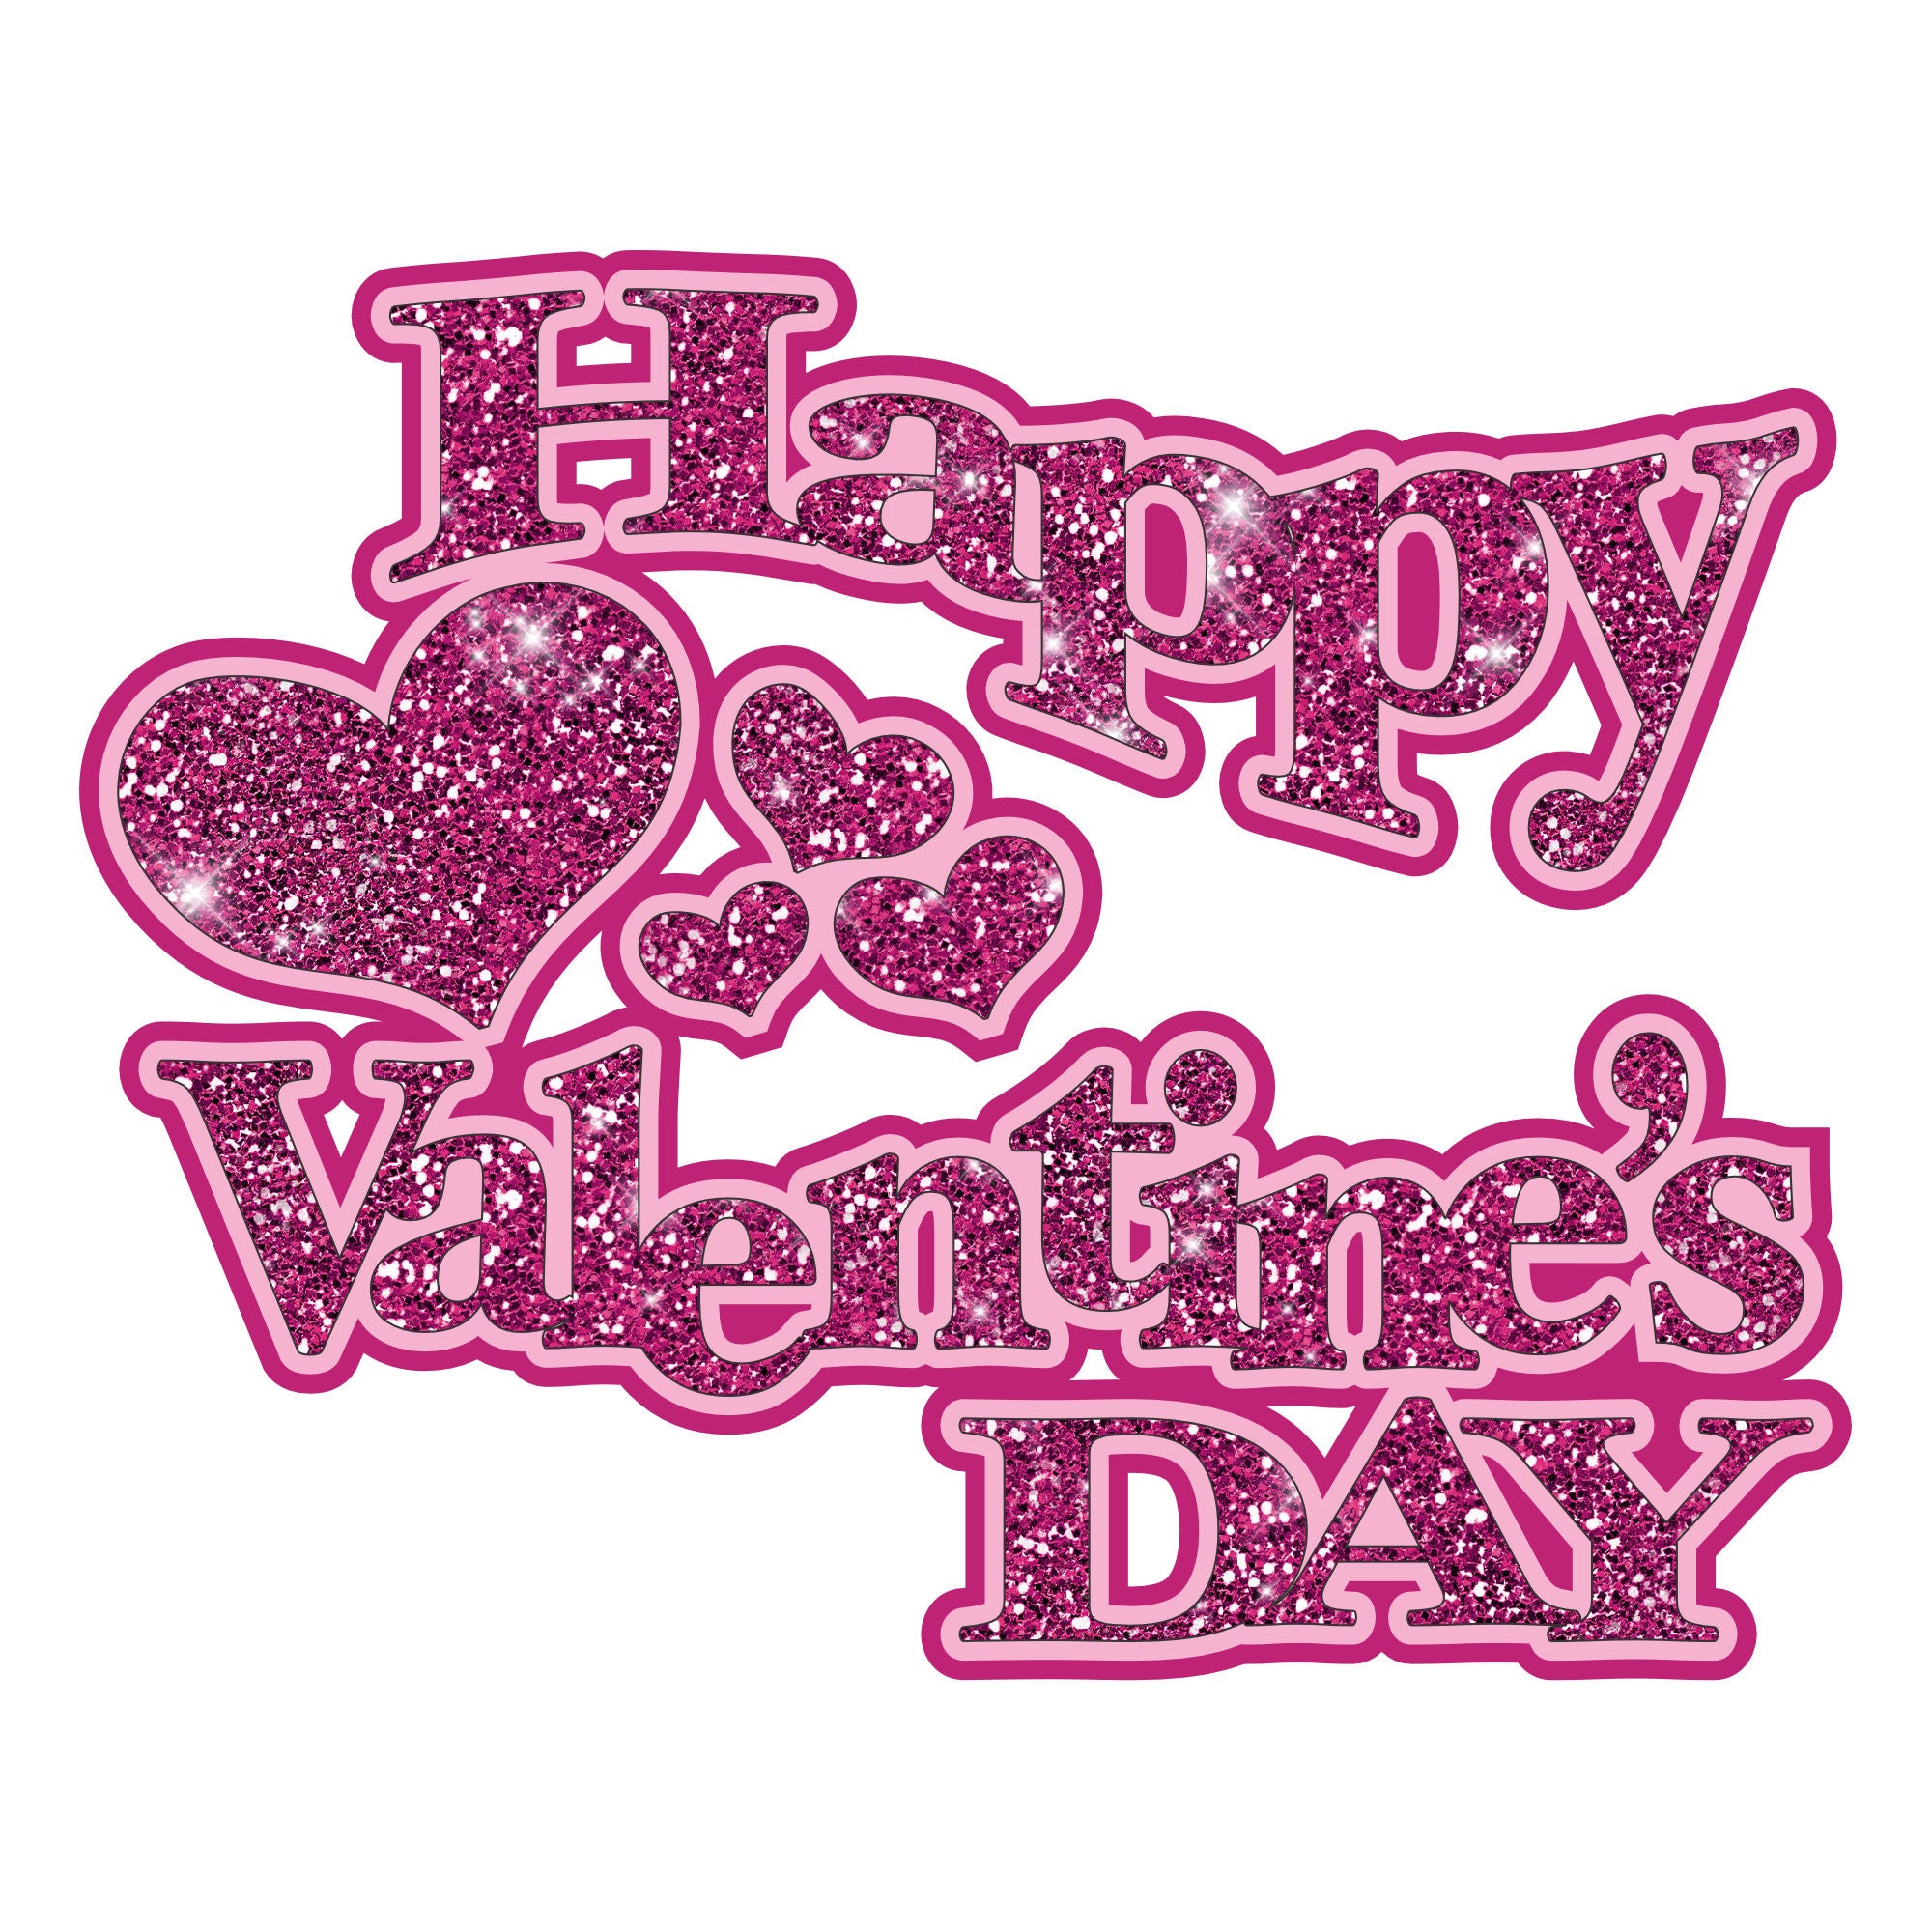 Happy Valentine's Day Glittered Title 6x5 Fully-Assembled Laser Cut Scrapbook Embellishment by SSC Laser Designs